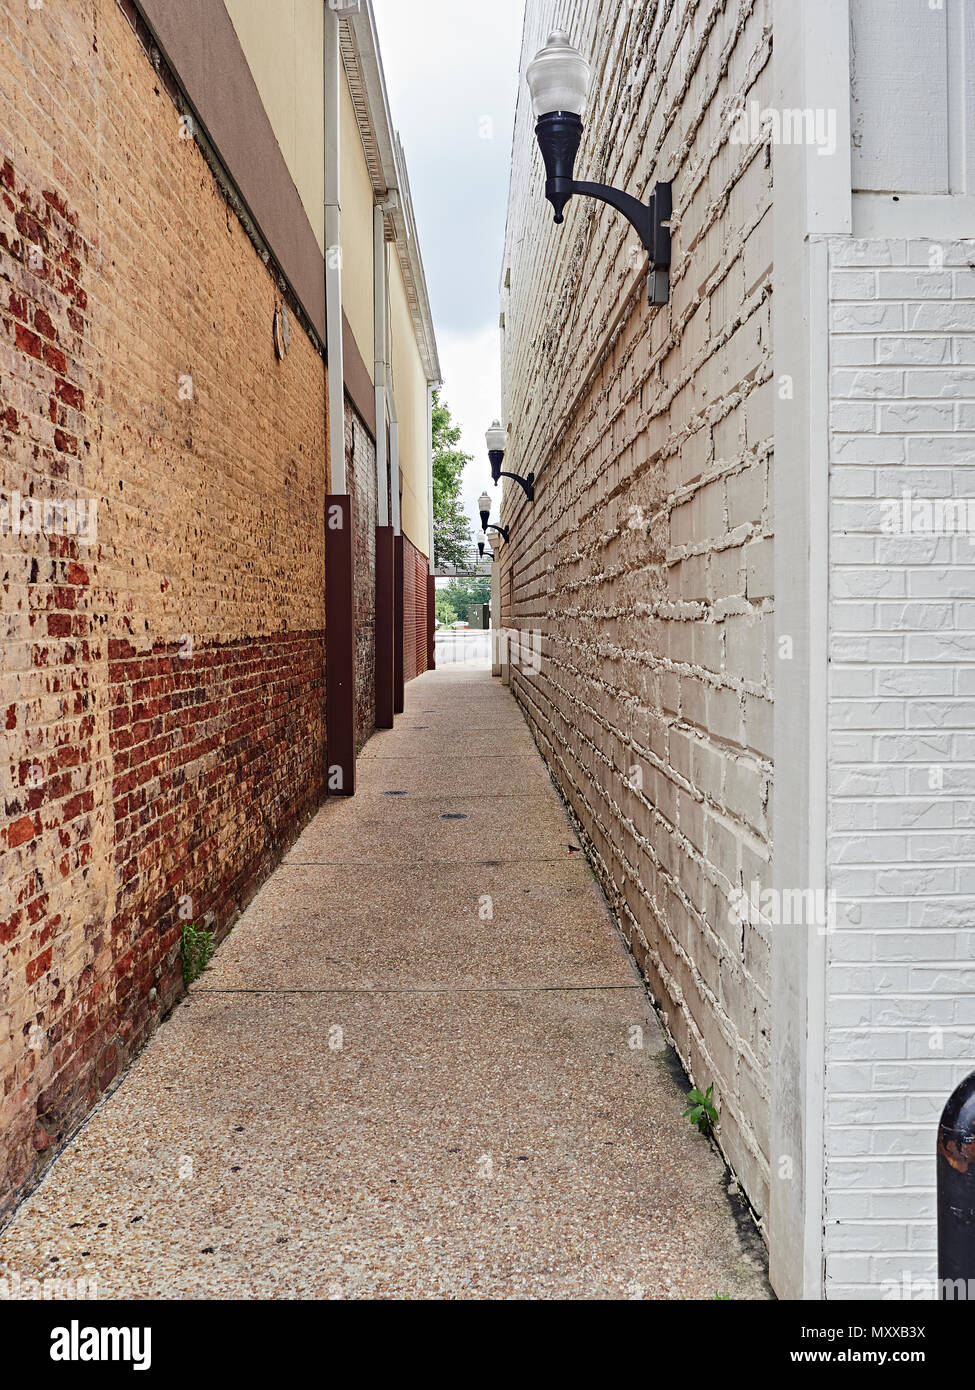 Simple quiet narrow city or urban alley way with high brick walls in Auburn Alabama, USA. Stock Photo